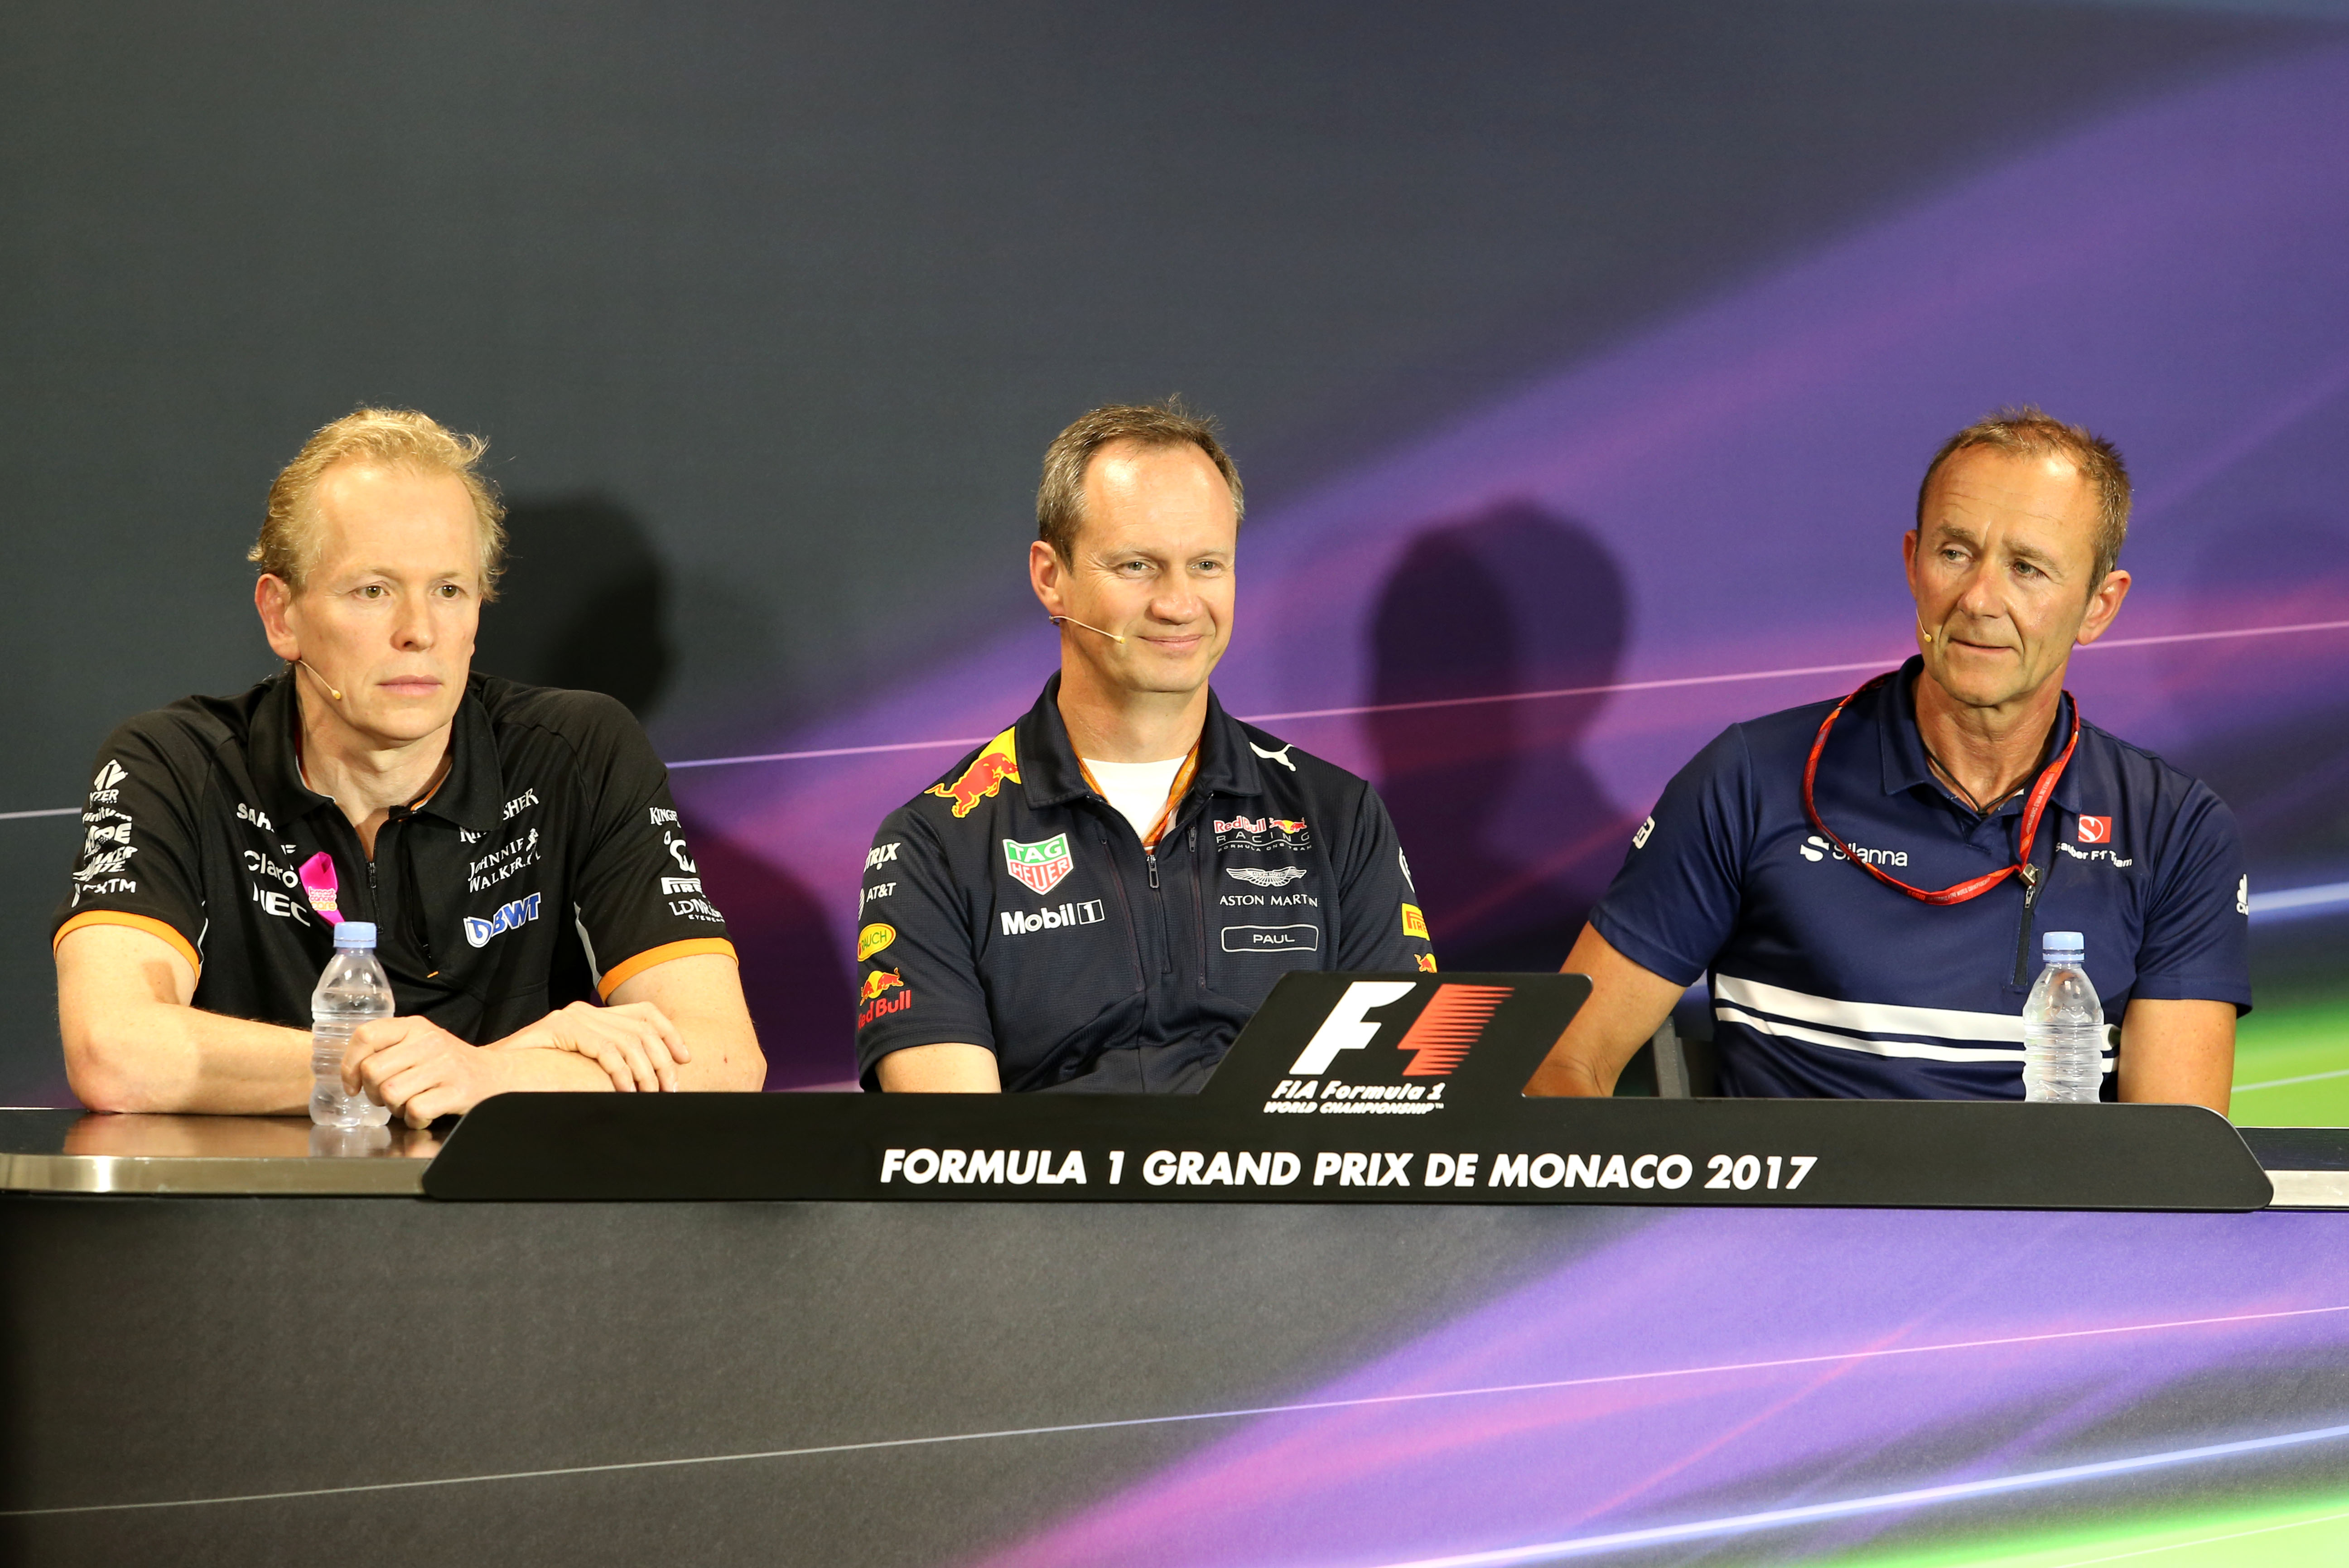 The FIA Press Conference (L to R): Andrew Green (GBR) Sahara Force India F1 Team Technical Director; Paul Monaghan (GBR) Red Bull Racing Chief Engineer; Jorg Zander (GER) Sauber F1 Team Technical Director.
Monaco Grand Prix, Thursday 25th May 2017. Monte Carlo, Monaco.